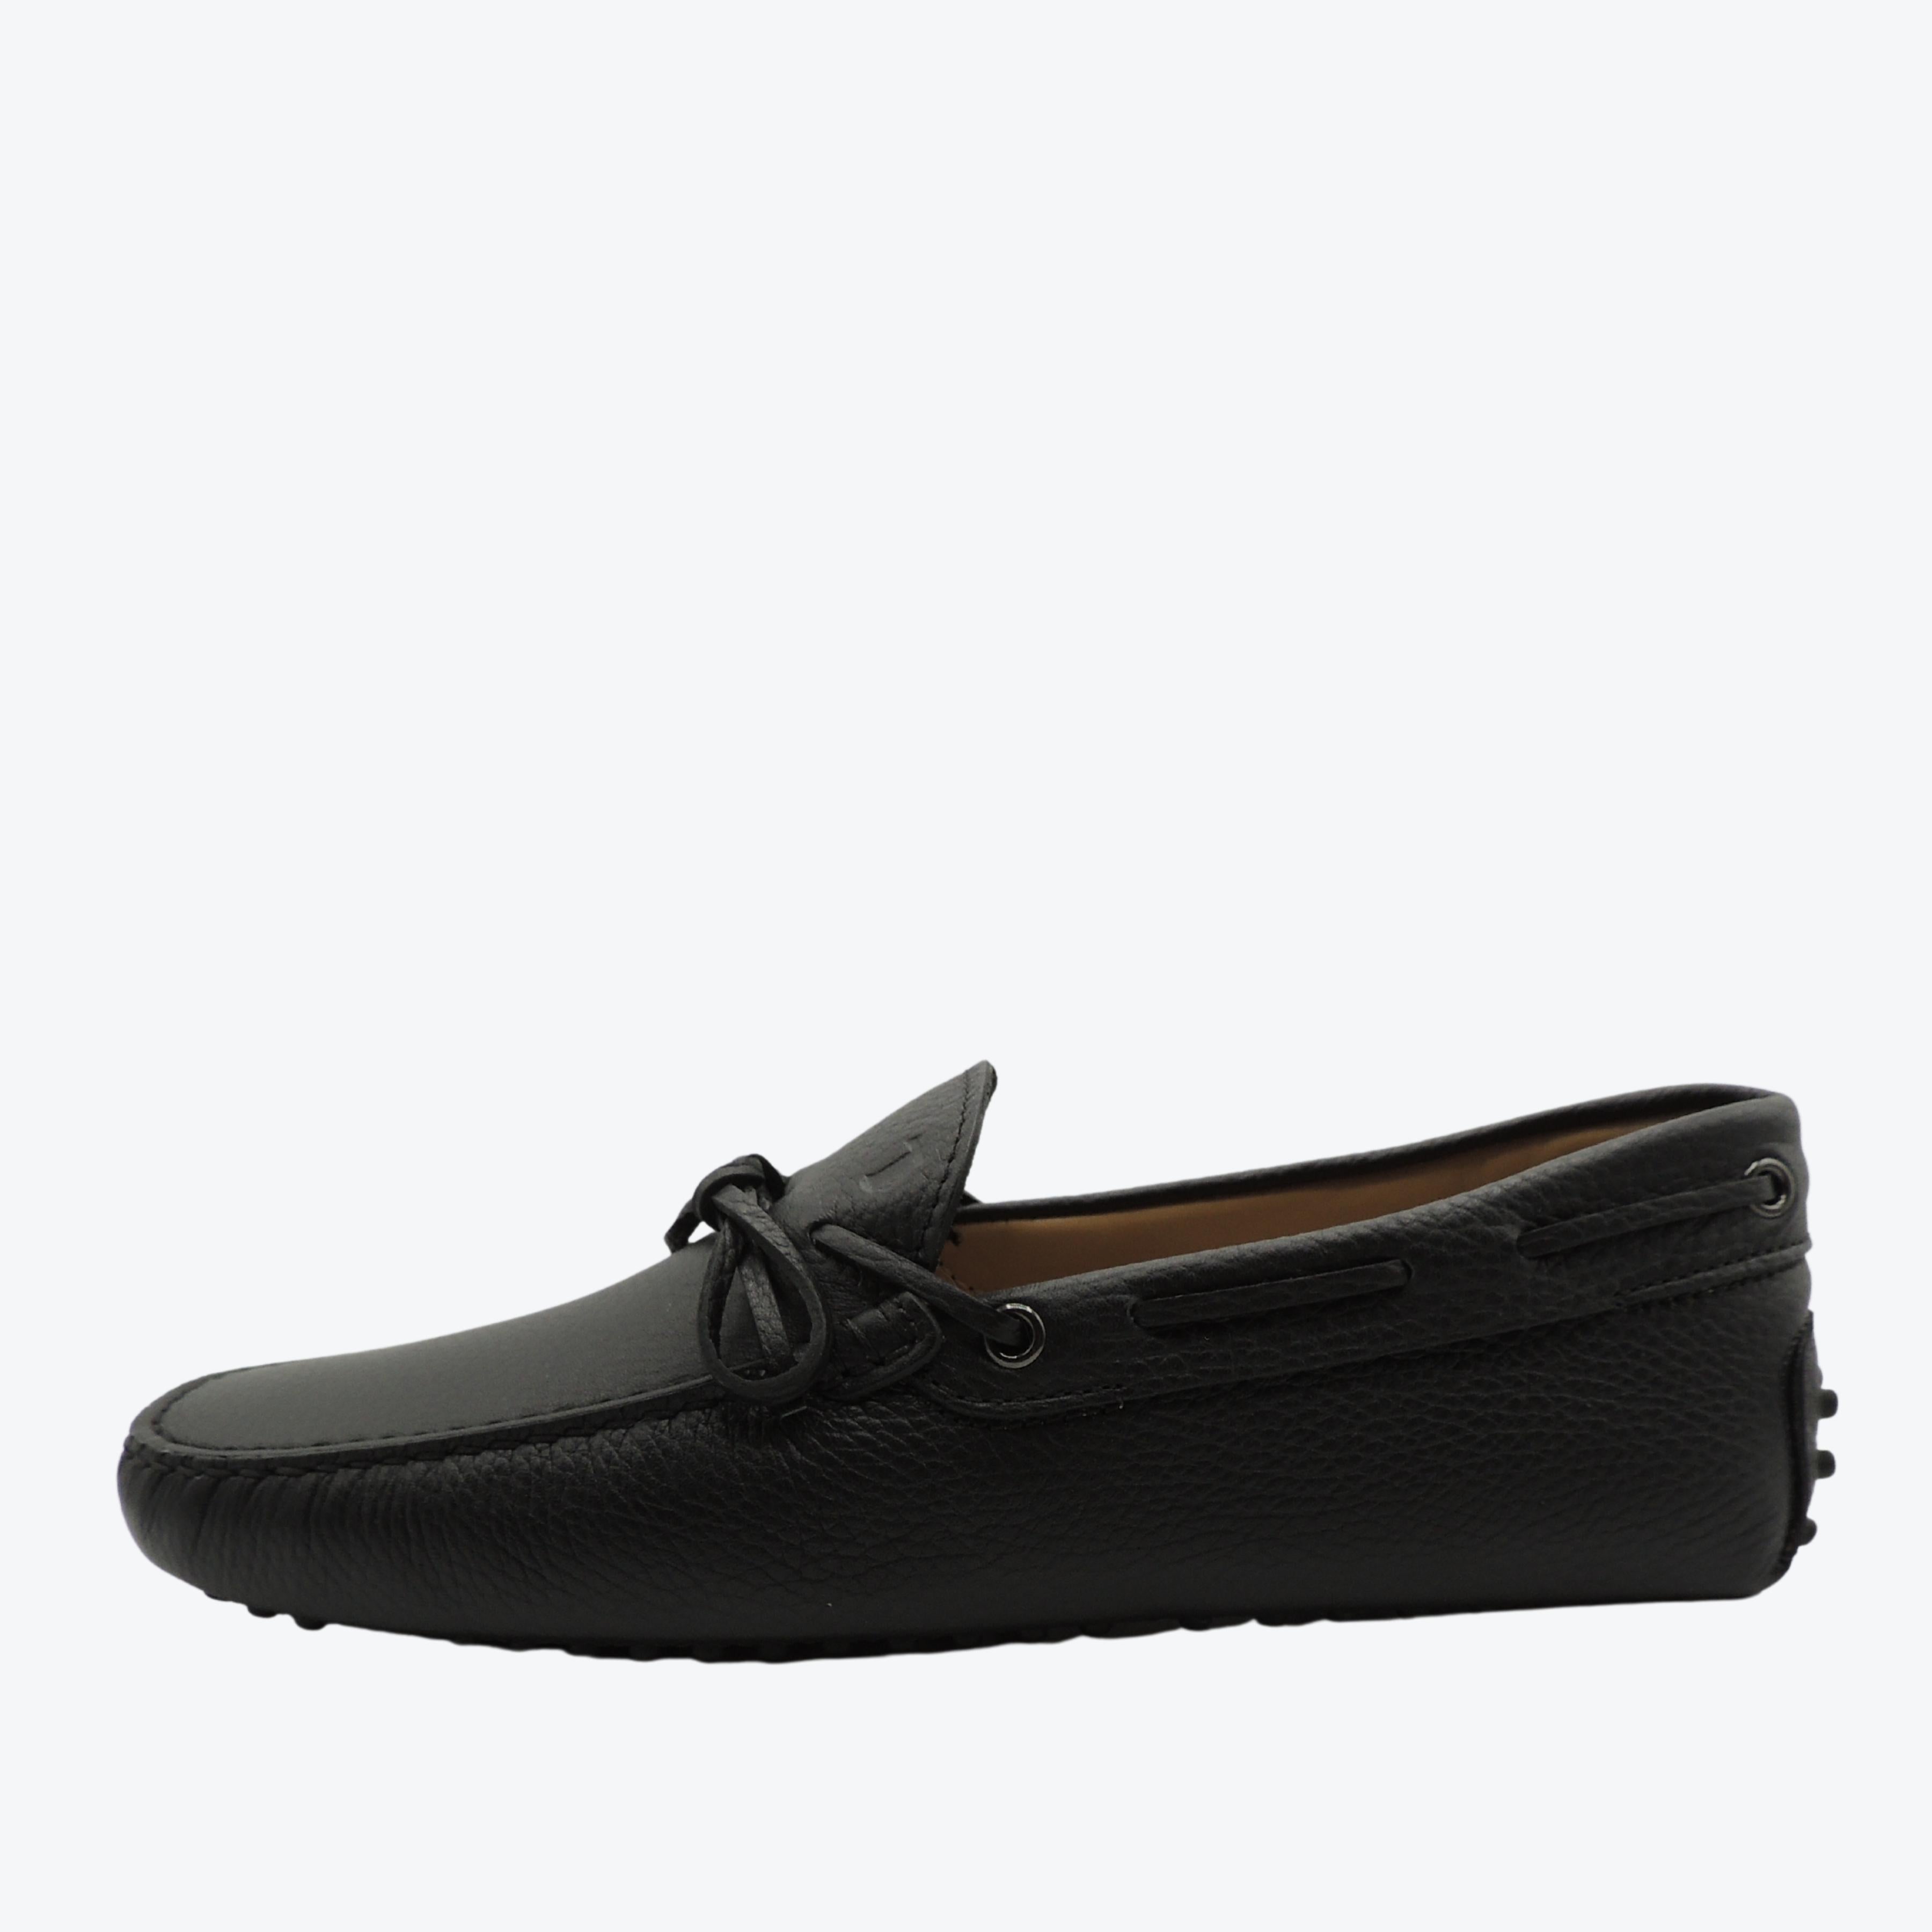 Tod's Gommino Driving Shoes Loafers in Leather Black UK 8